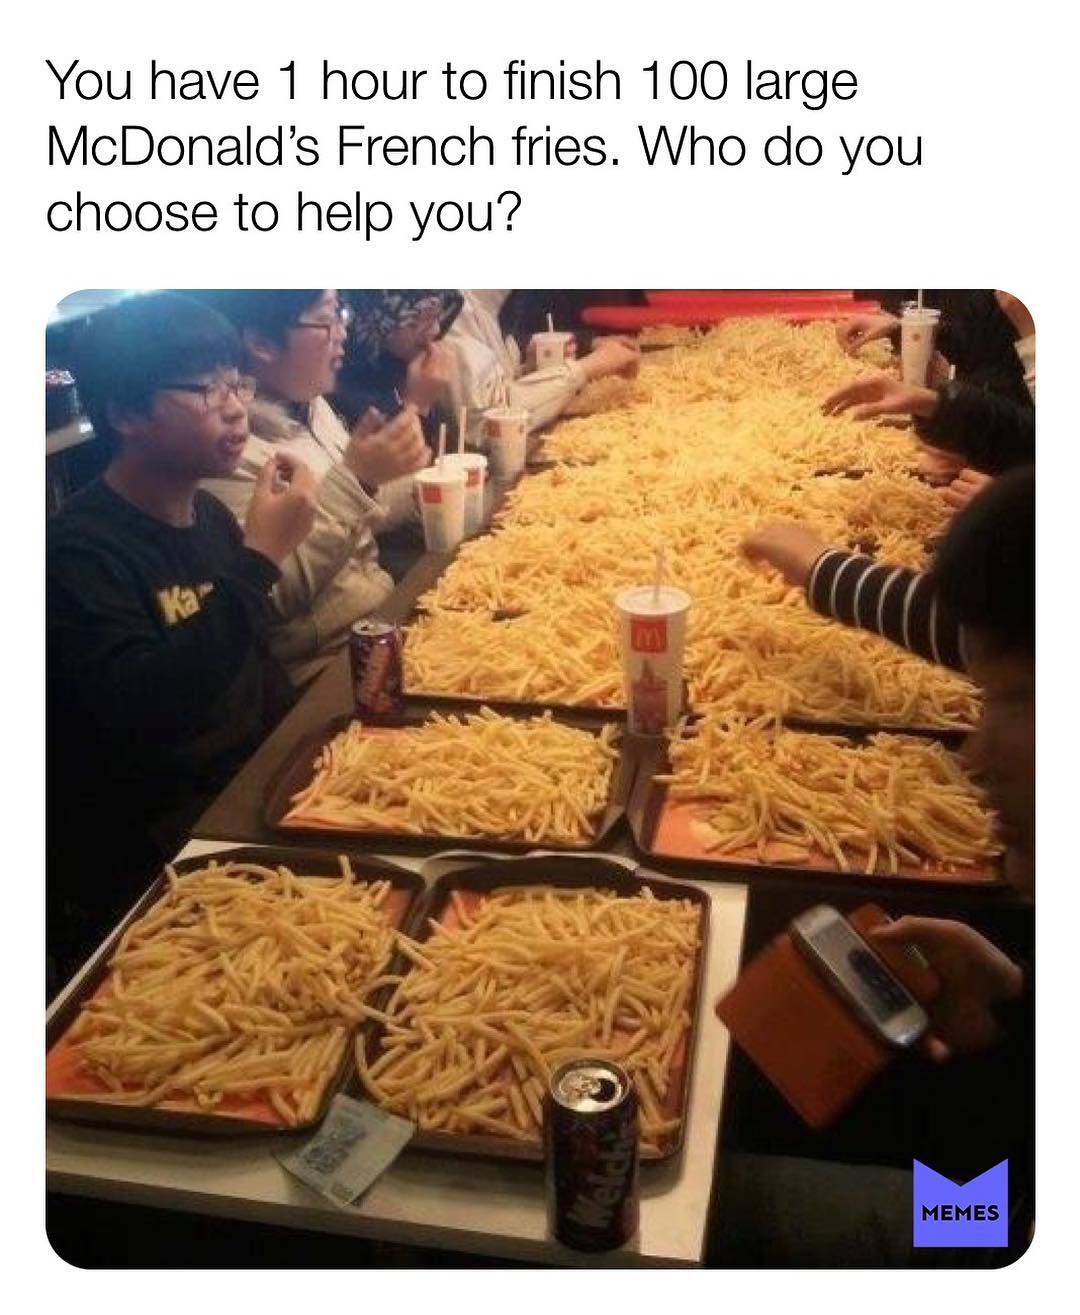 You have 1 hour to finish 100 large McDonald's French fries. Who do you choose to help you?